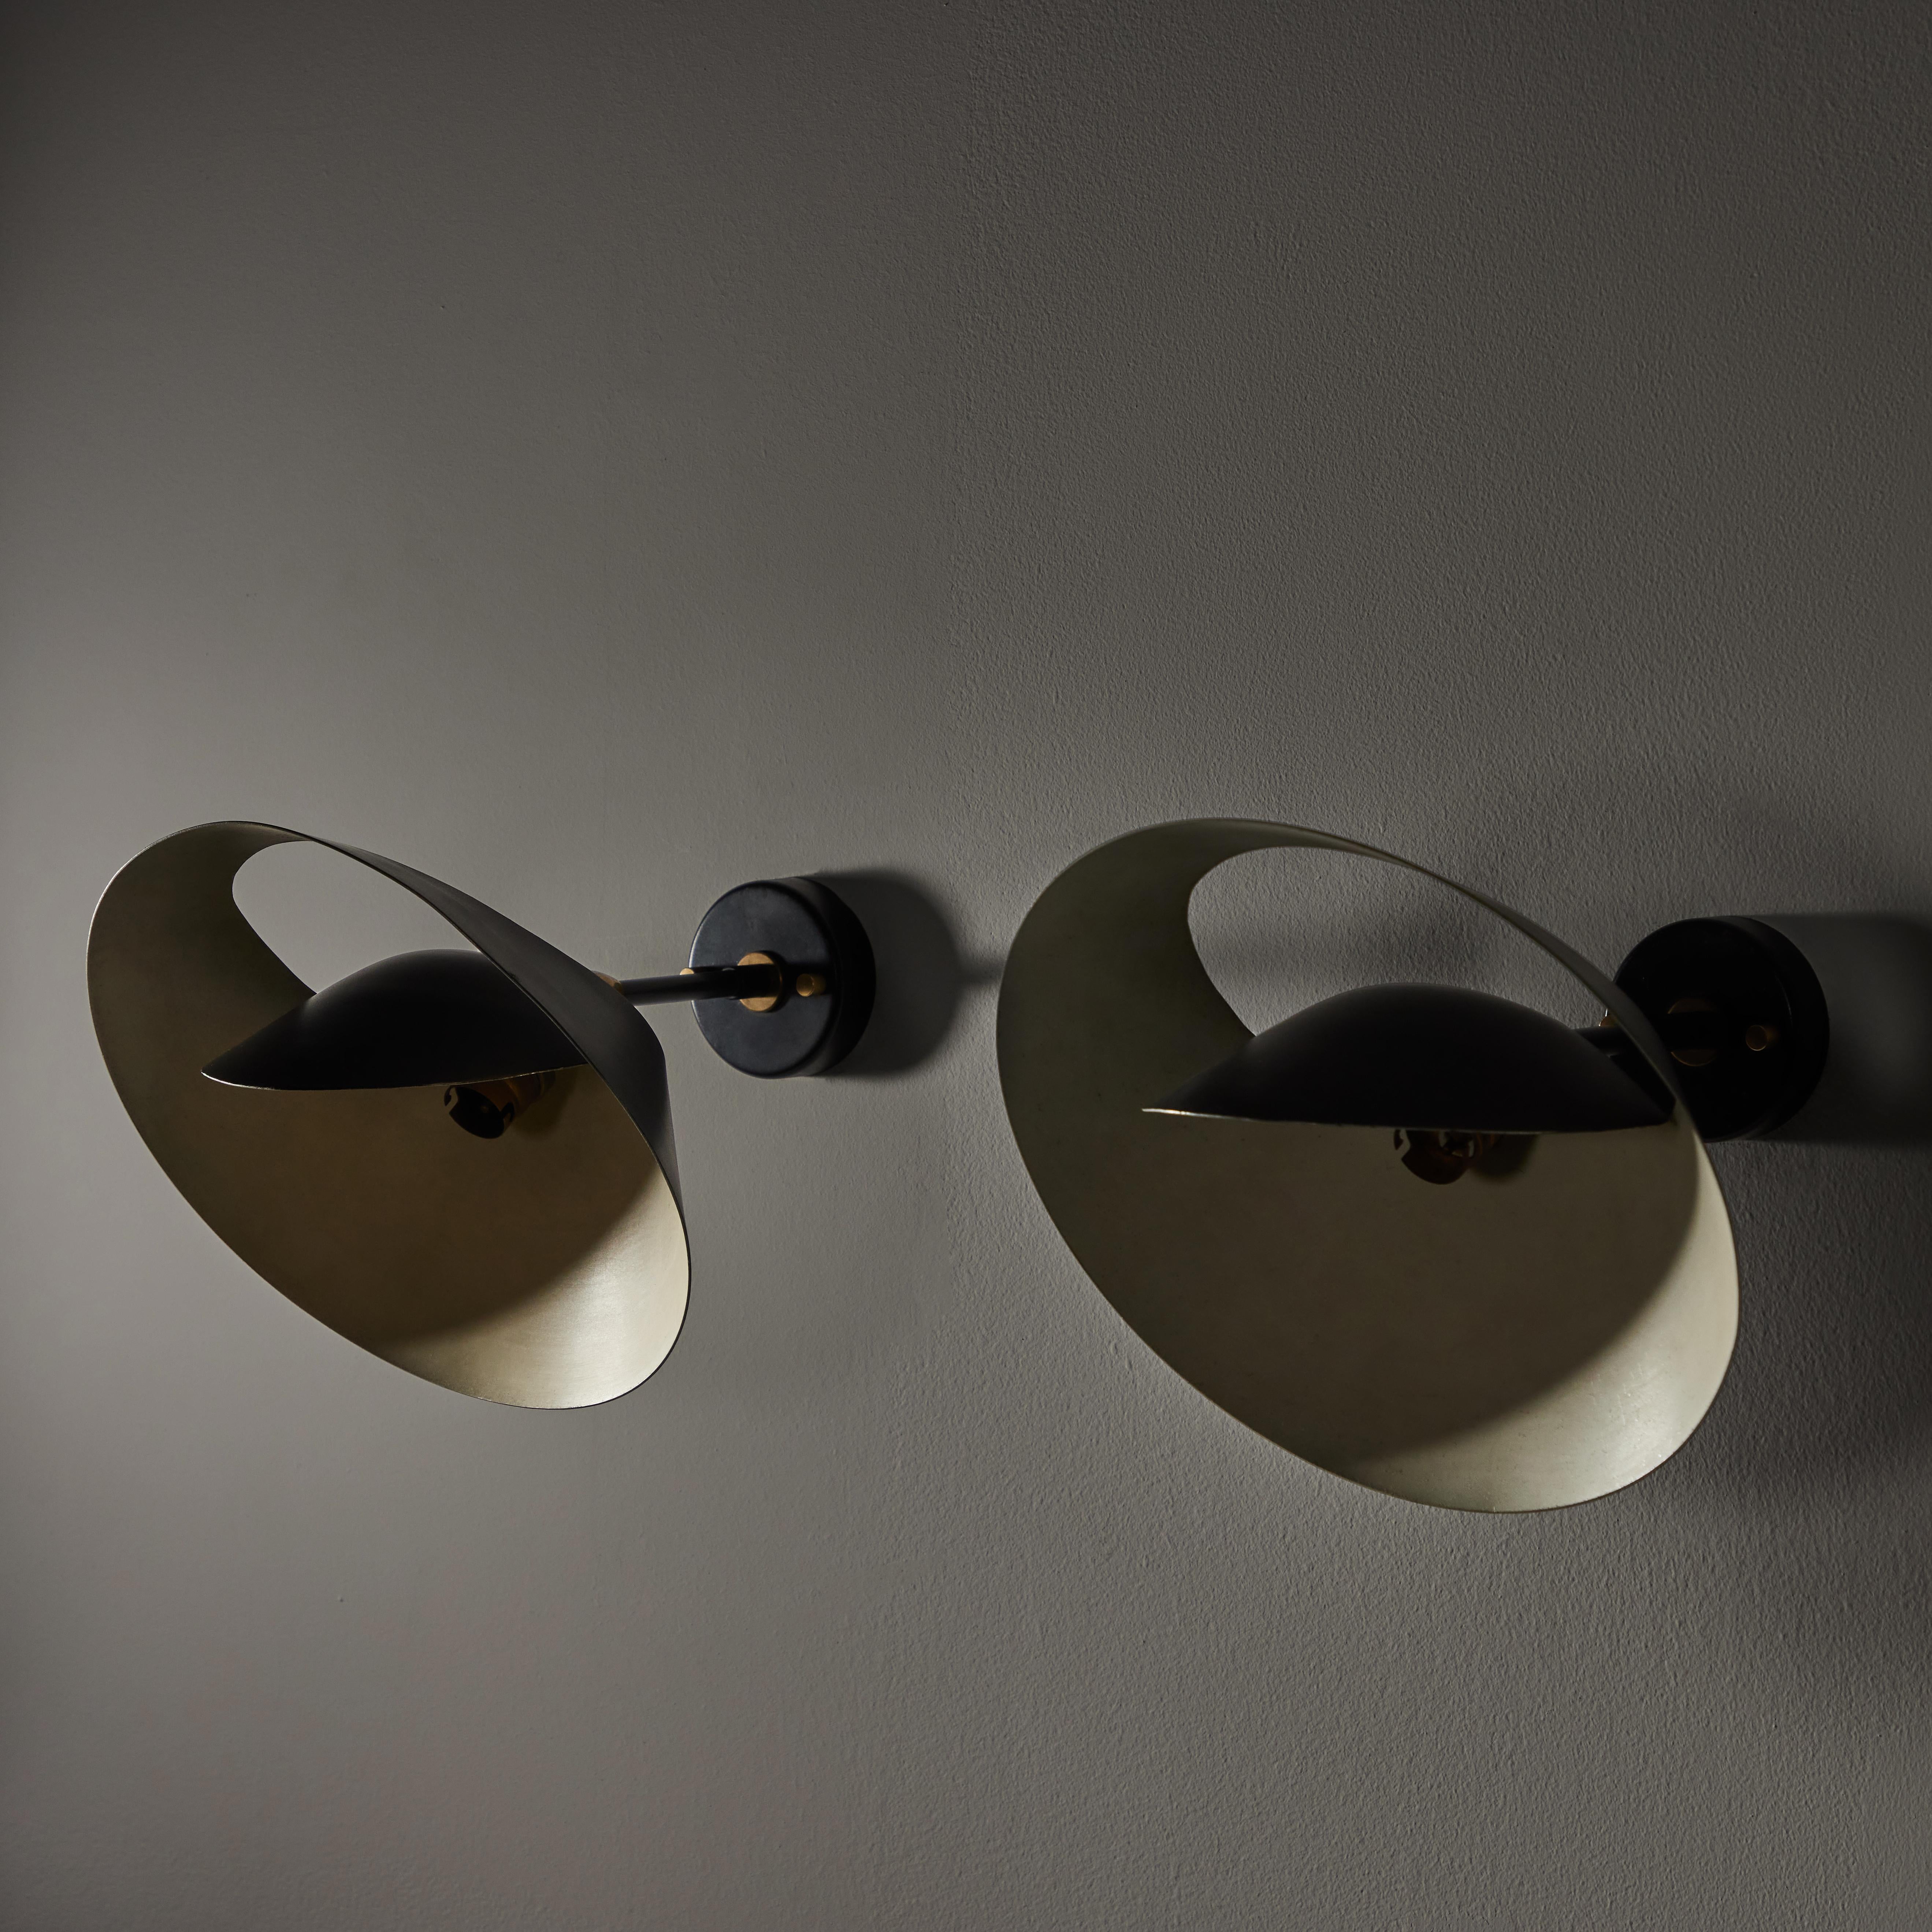 Applique Saturne sconces by Serge Mouille. Manufactured in France, circa the 1970s. Remarkably formed sconces that mimic the orbital rings of Saturn. Similar to other Mouille designs of this era, these rare sconces are constructed of black enameled